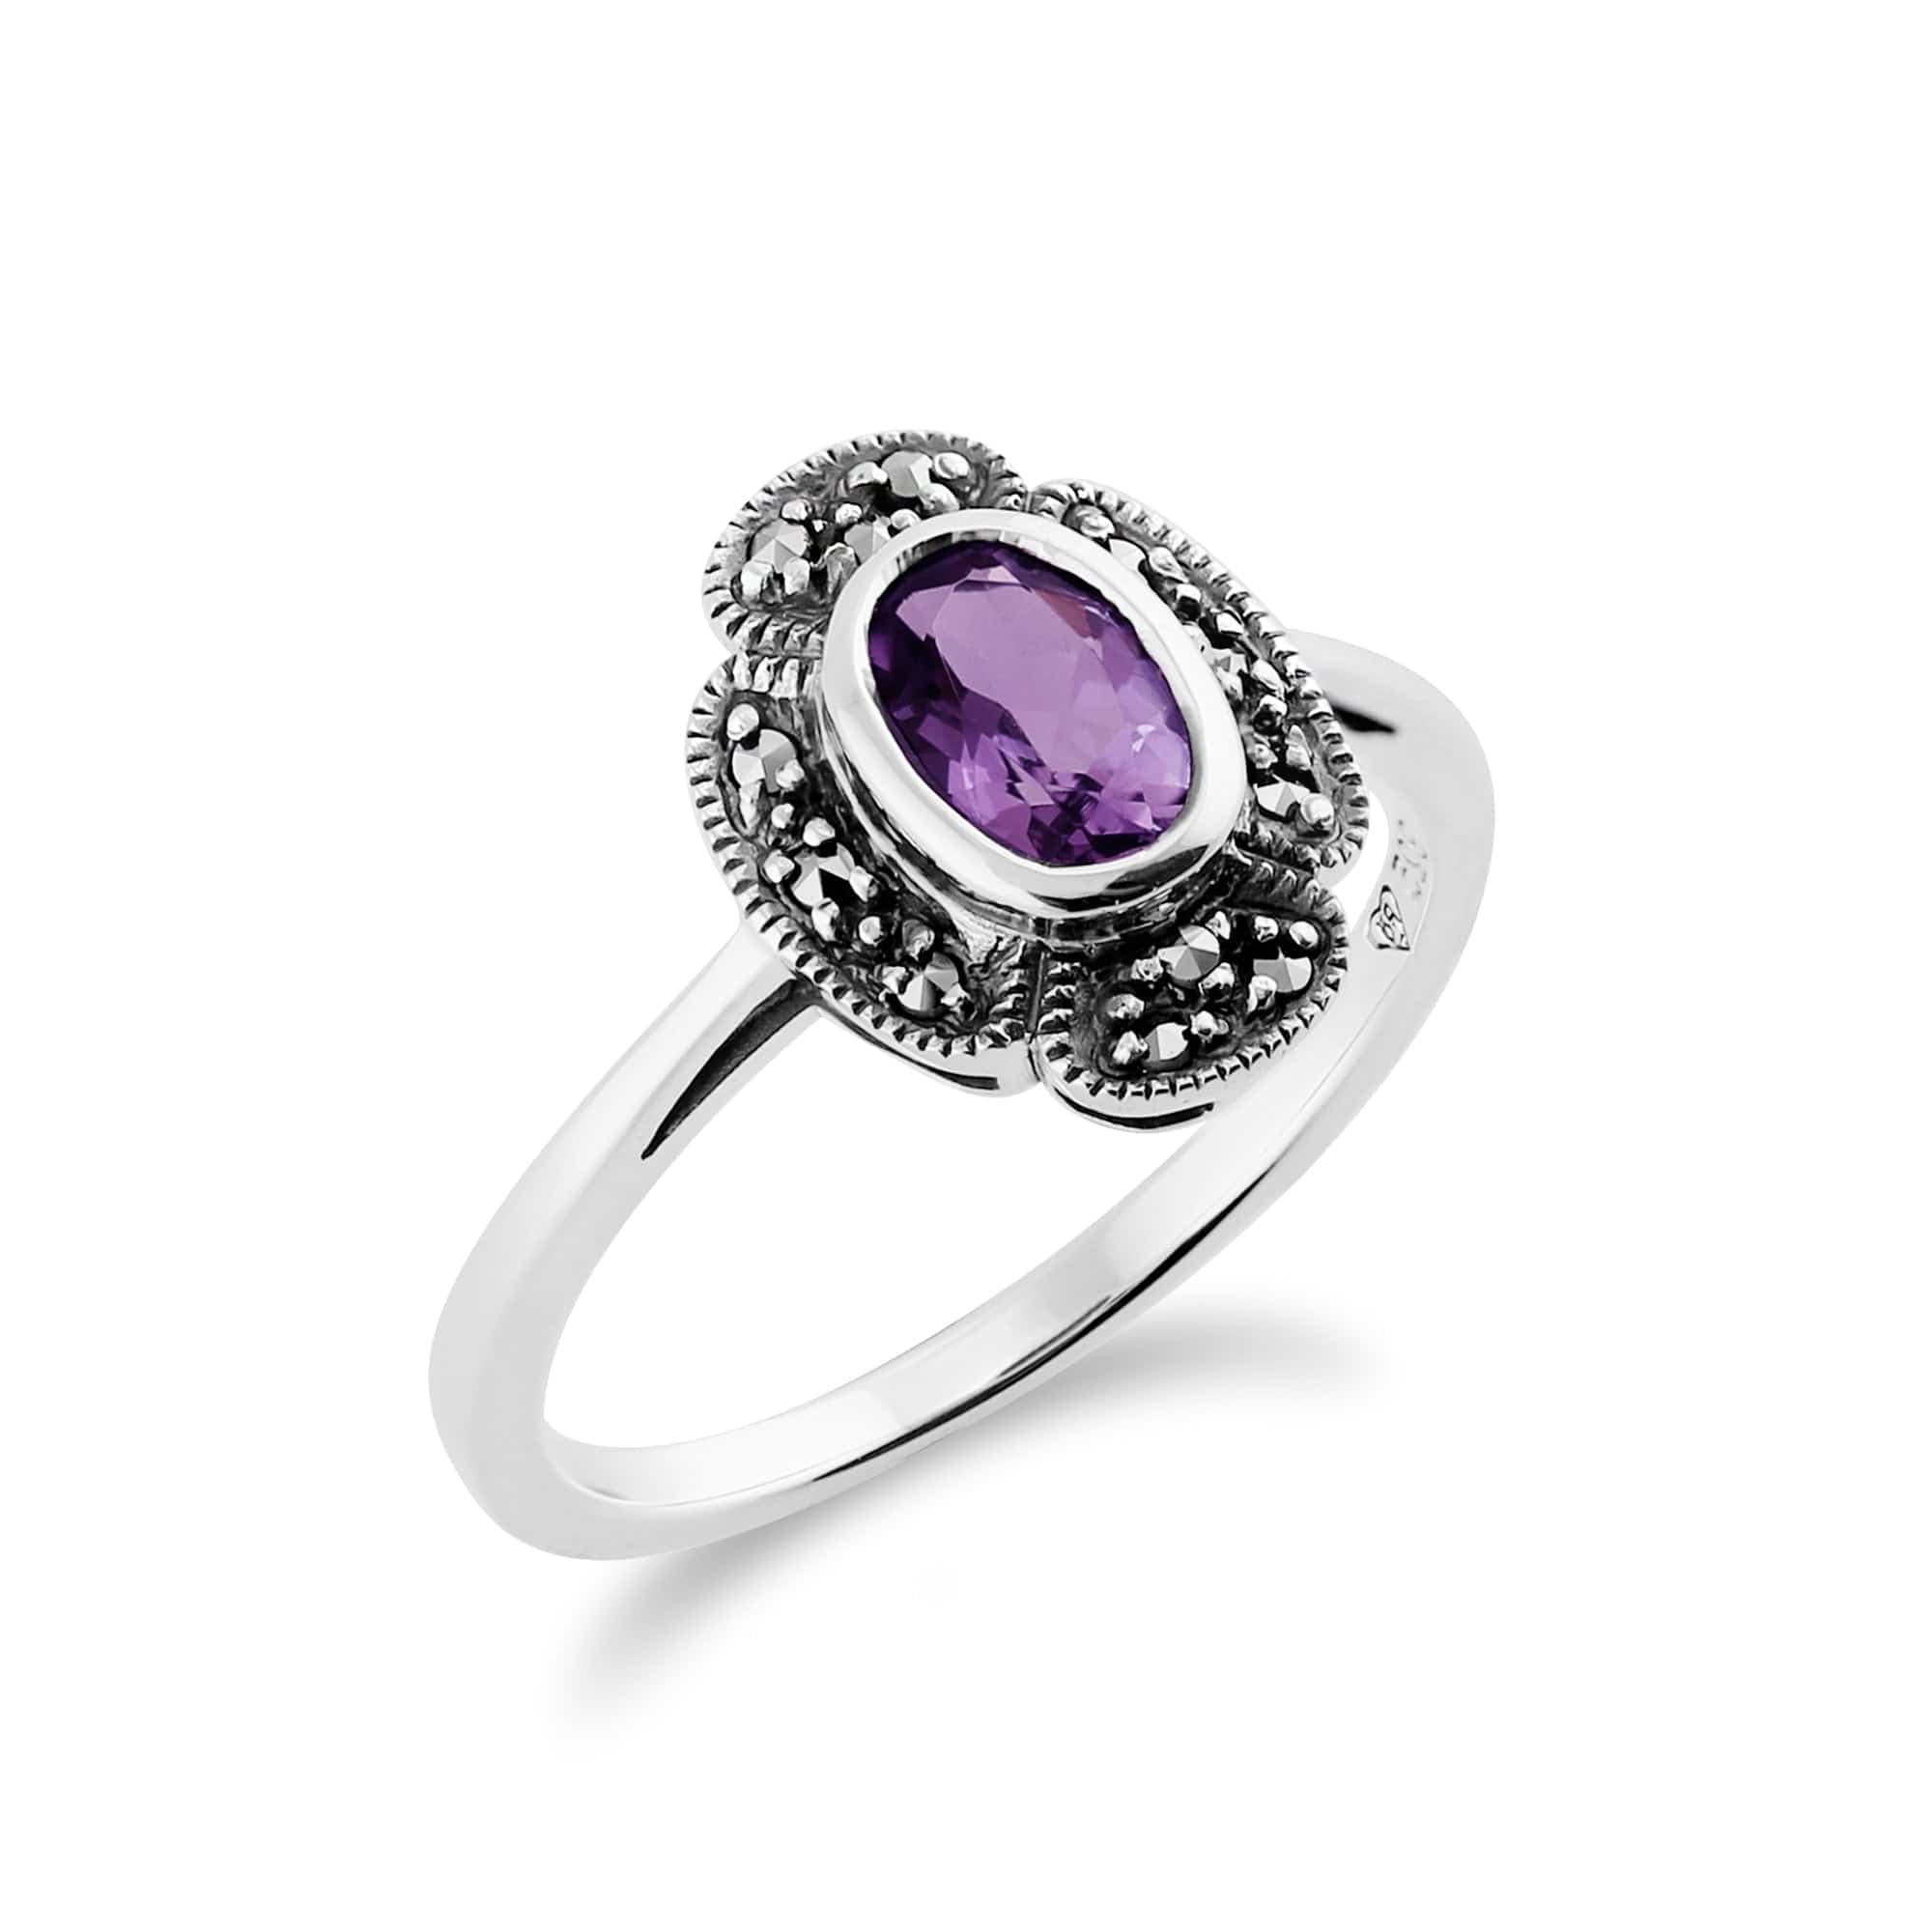 214R000201925 Art Deco Style Oval Amethyst & Marcasite Ring in 925 Sterling Silver 2